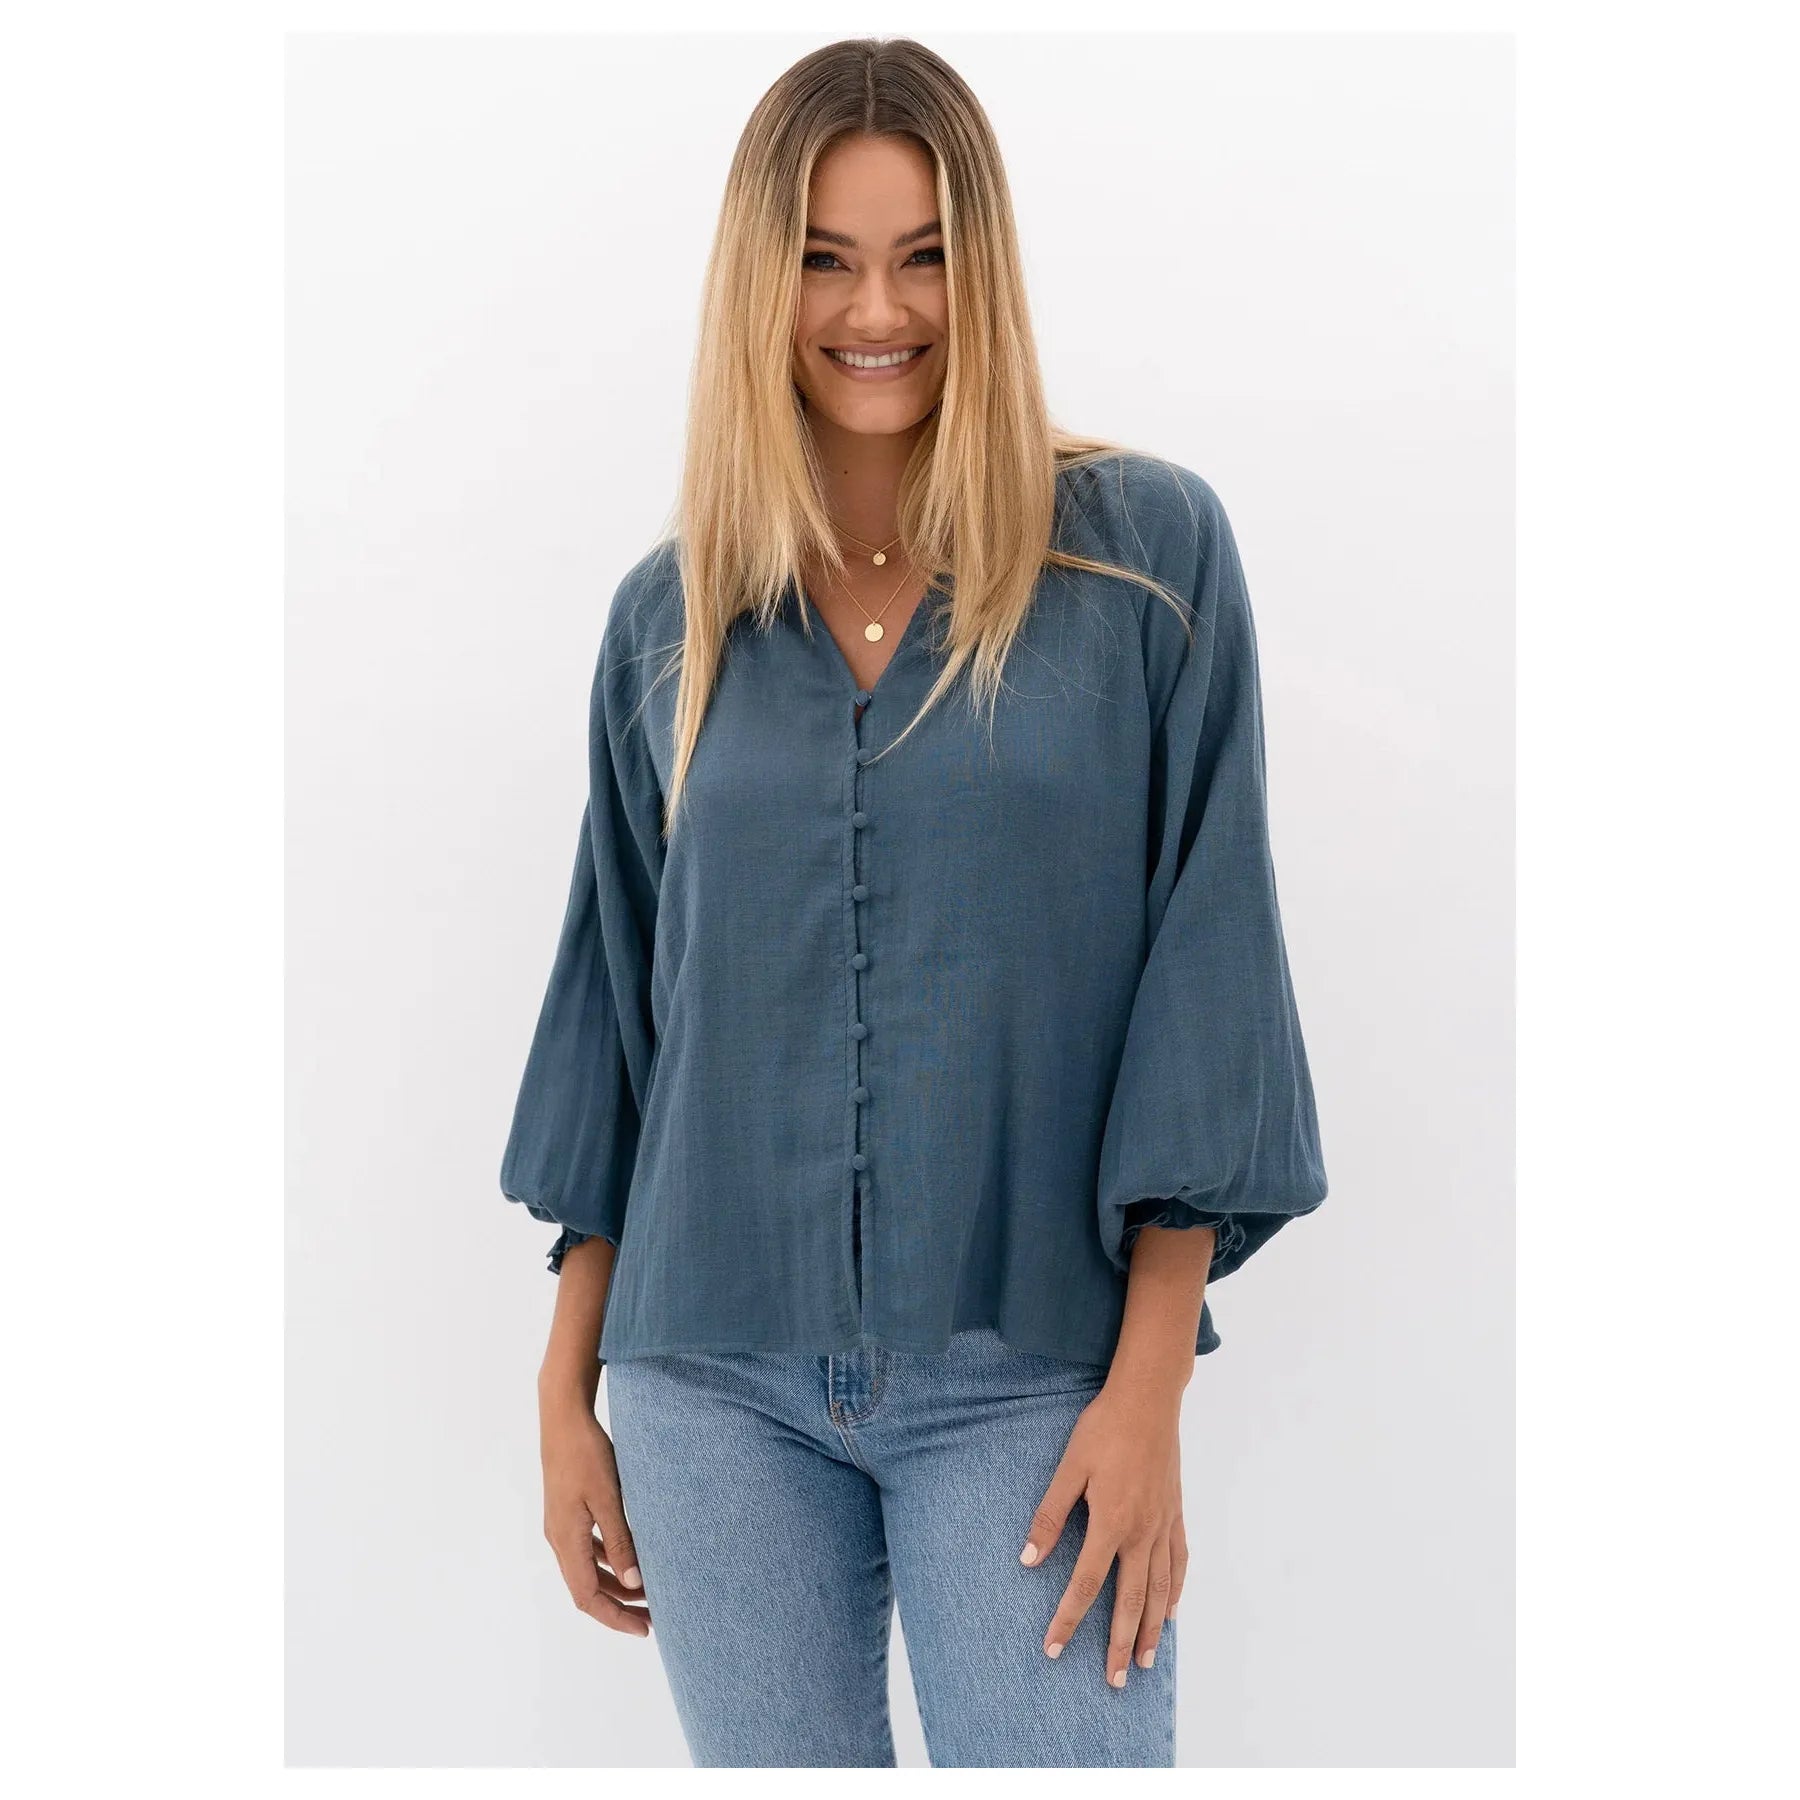 Humidity - Chi Chi Blouse Steele Blue